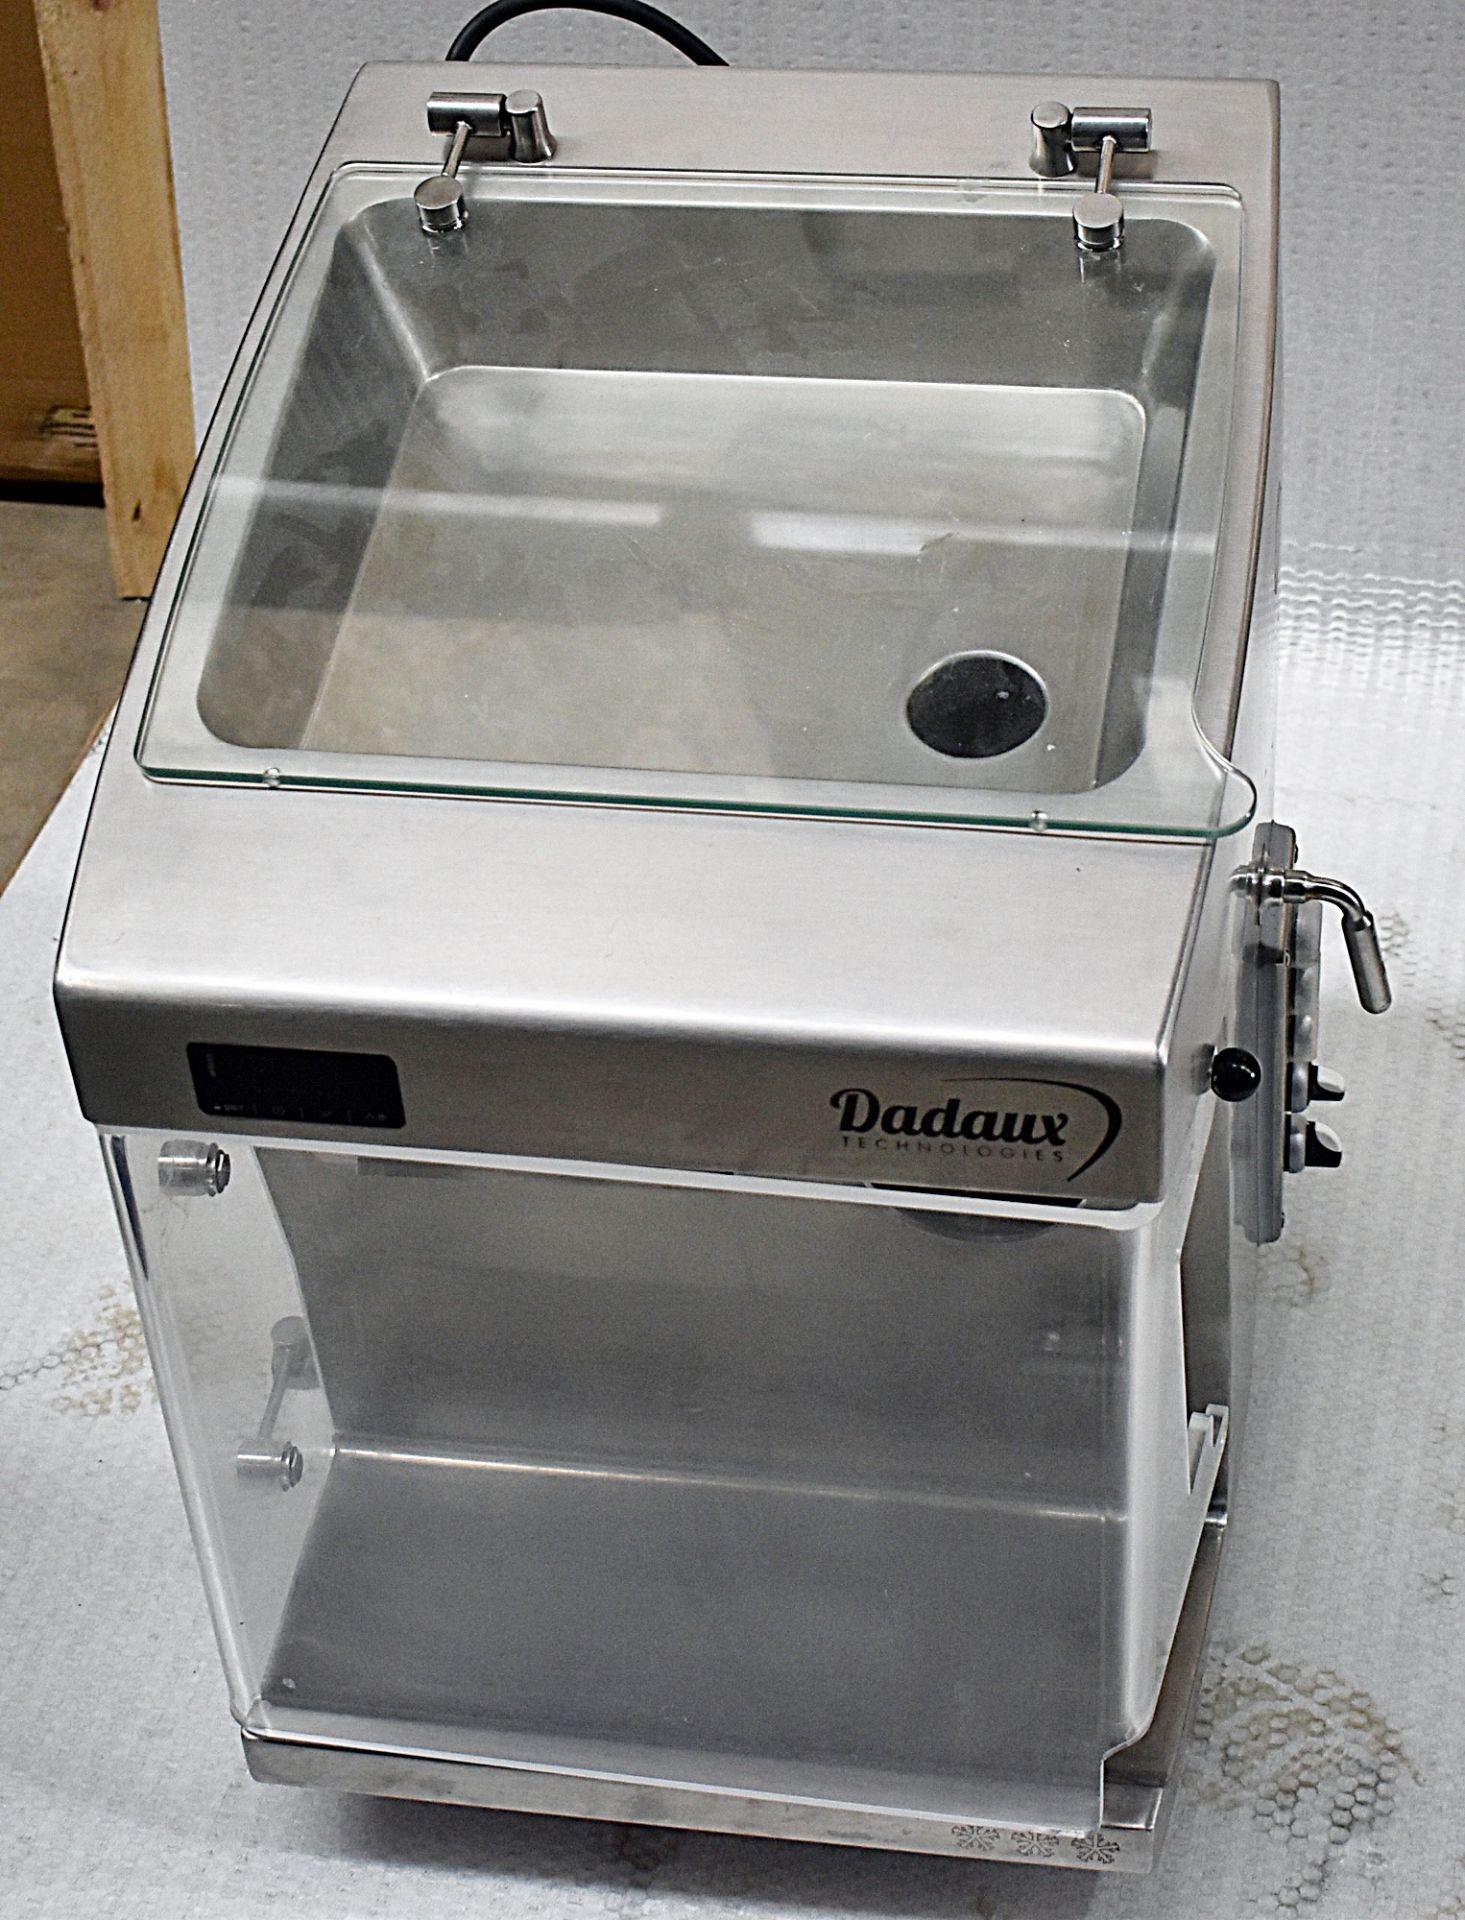 1 x Dadaux Setna Refrigerated Meat Mincer - Image 14 of 17